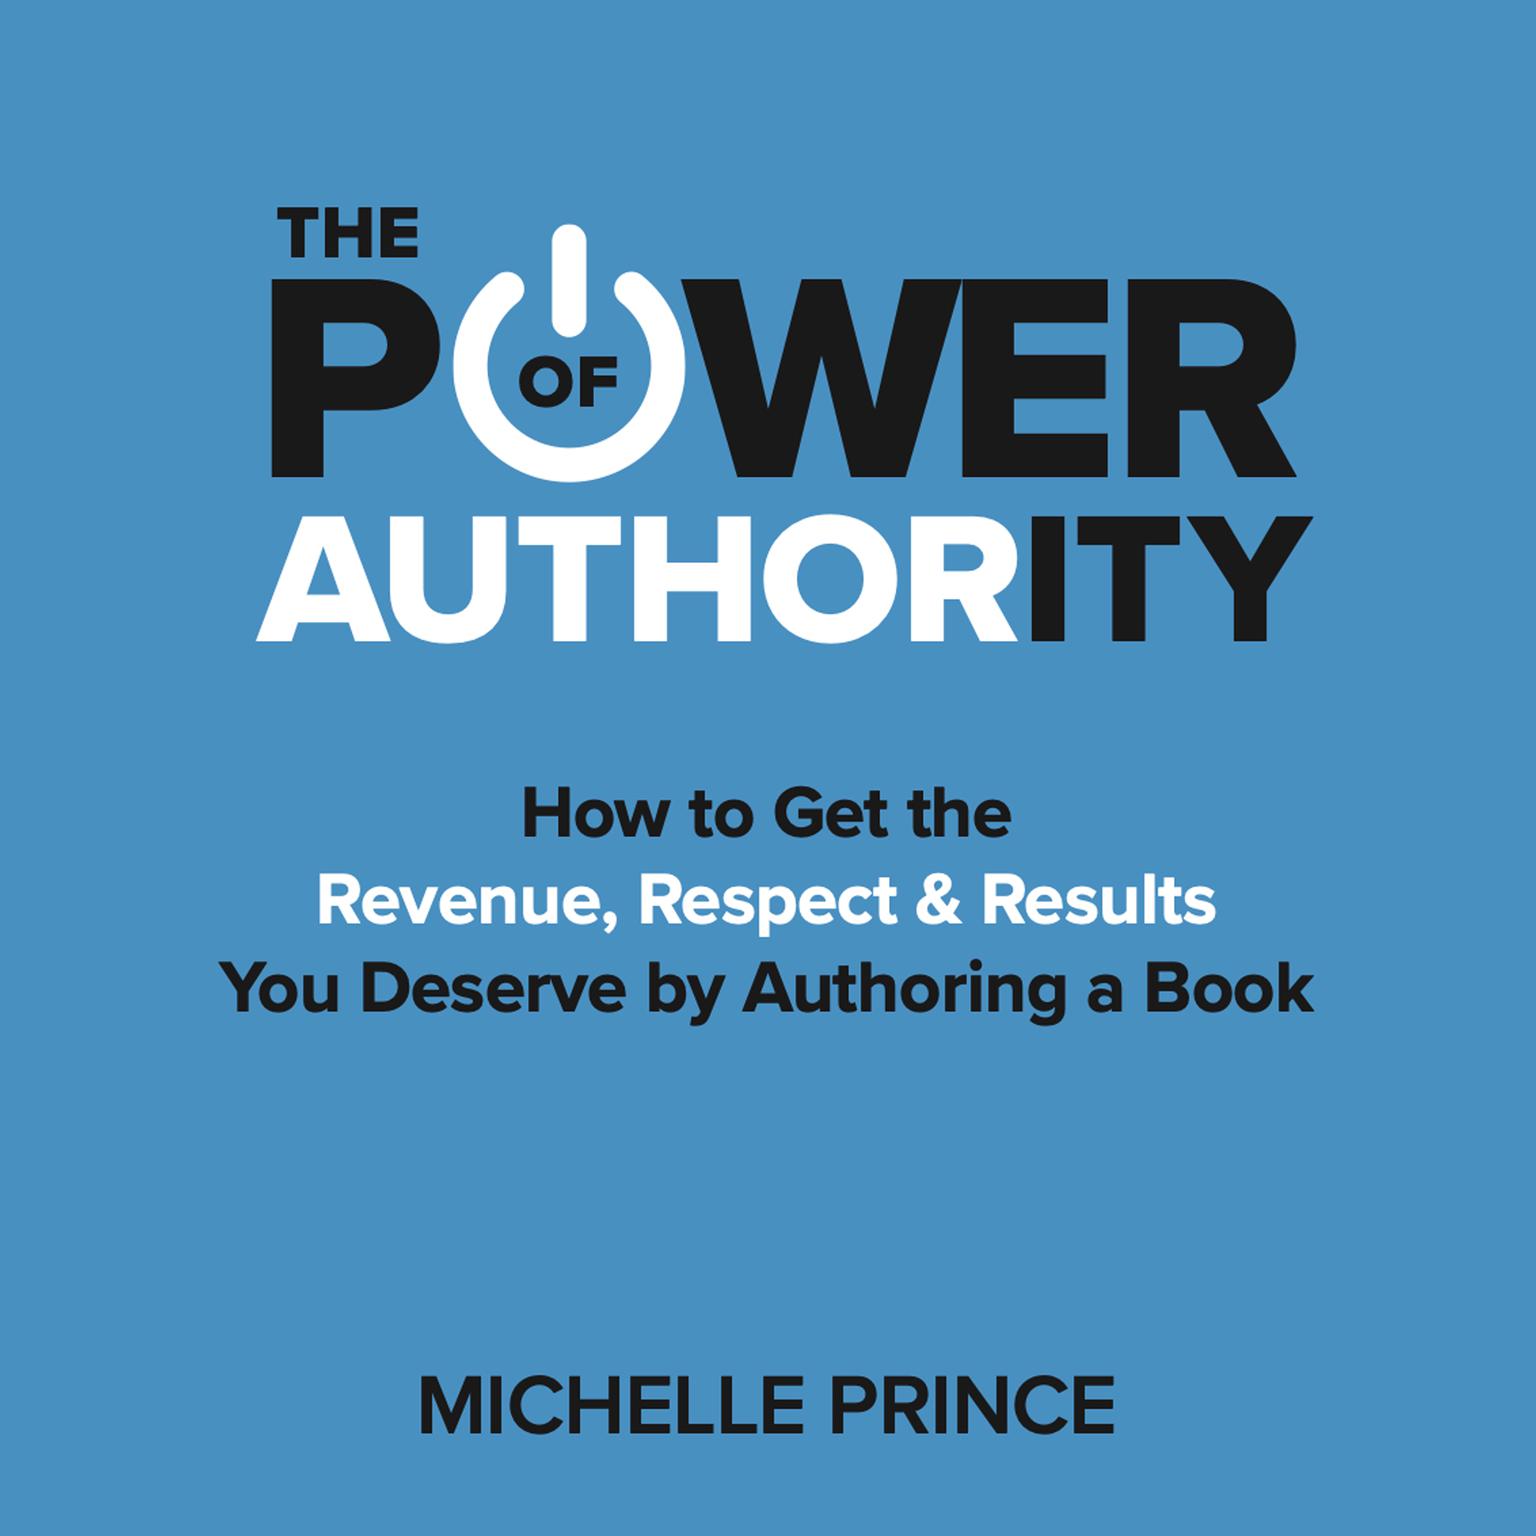 The Power of Authority: How to Get the Revenue, Respect & Results You Deserve by Authoring a Book Audiobook, by Michelle Prince